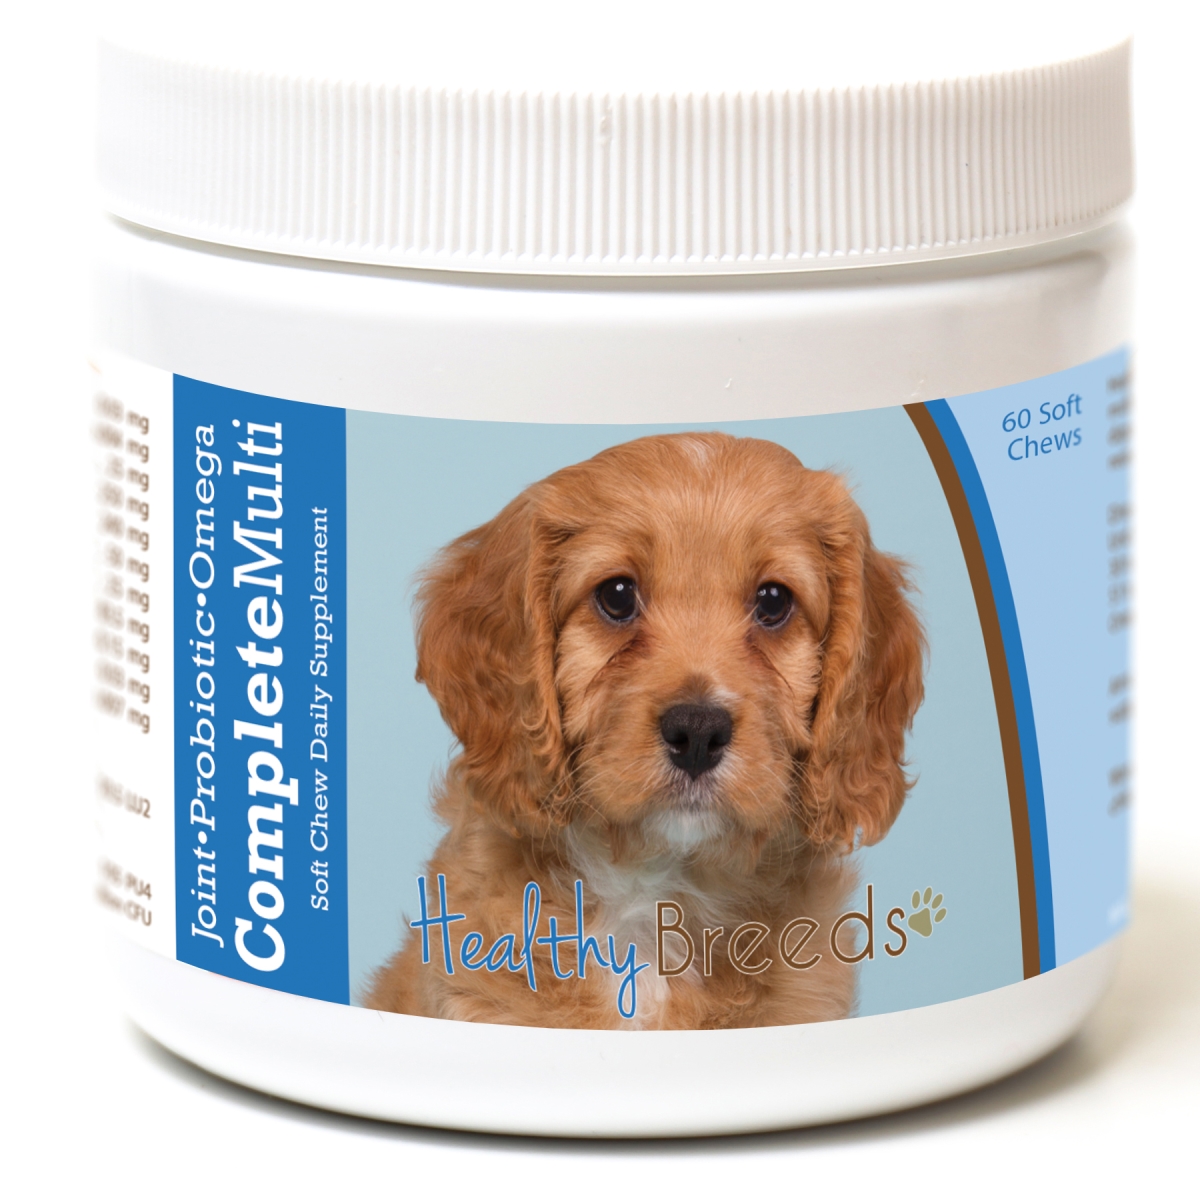 Picture of Healthy Breeds 192959007664 Cavapoo All in One Multivitamin Soft Chew - 60 Count